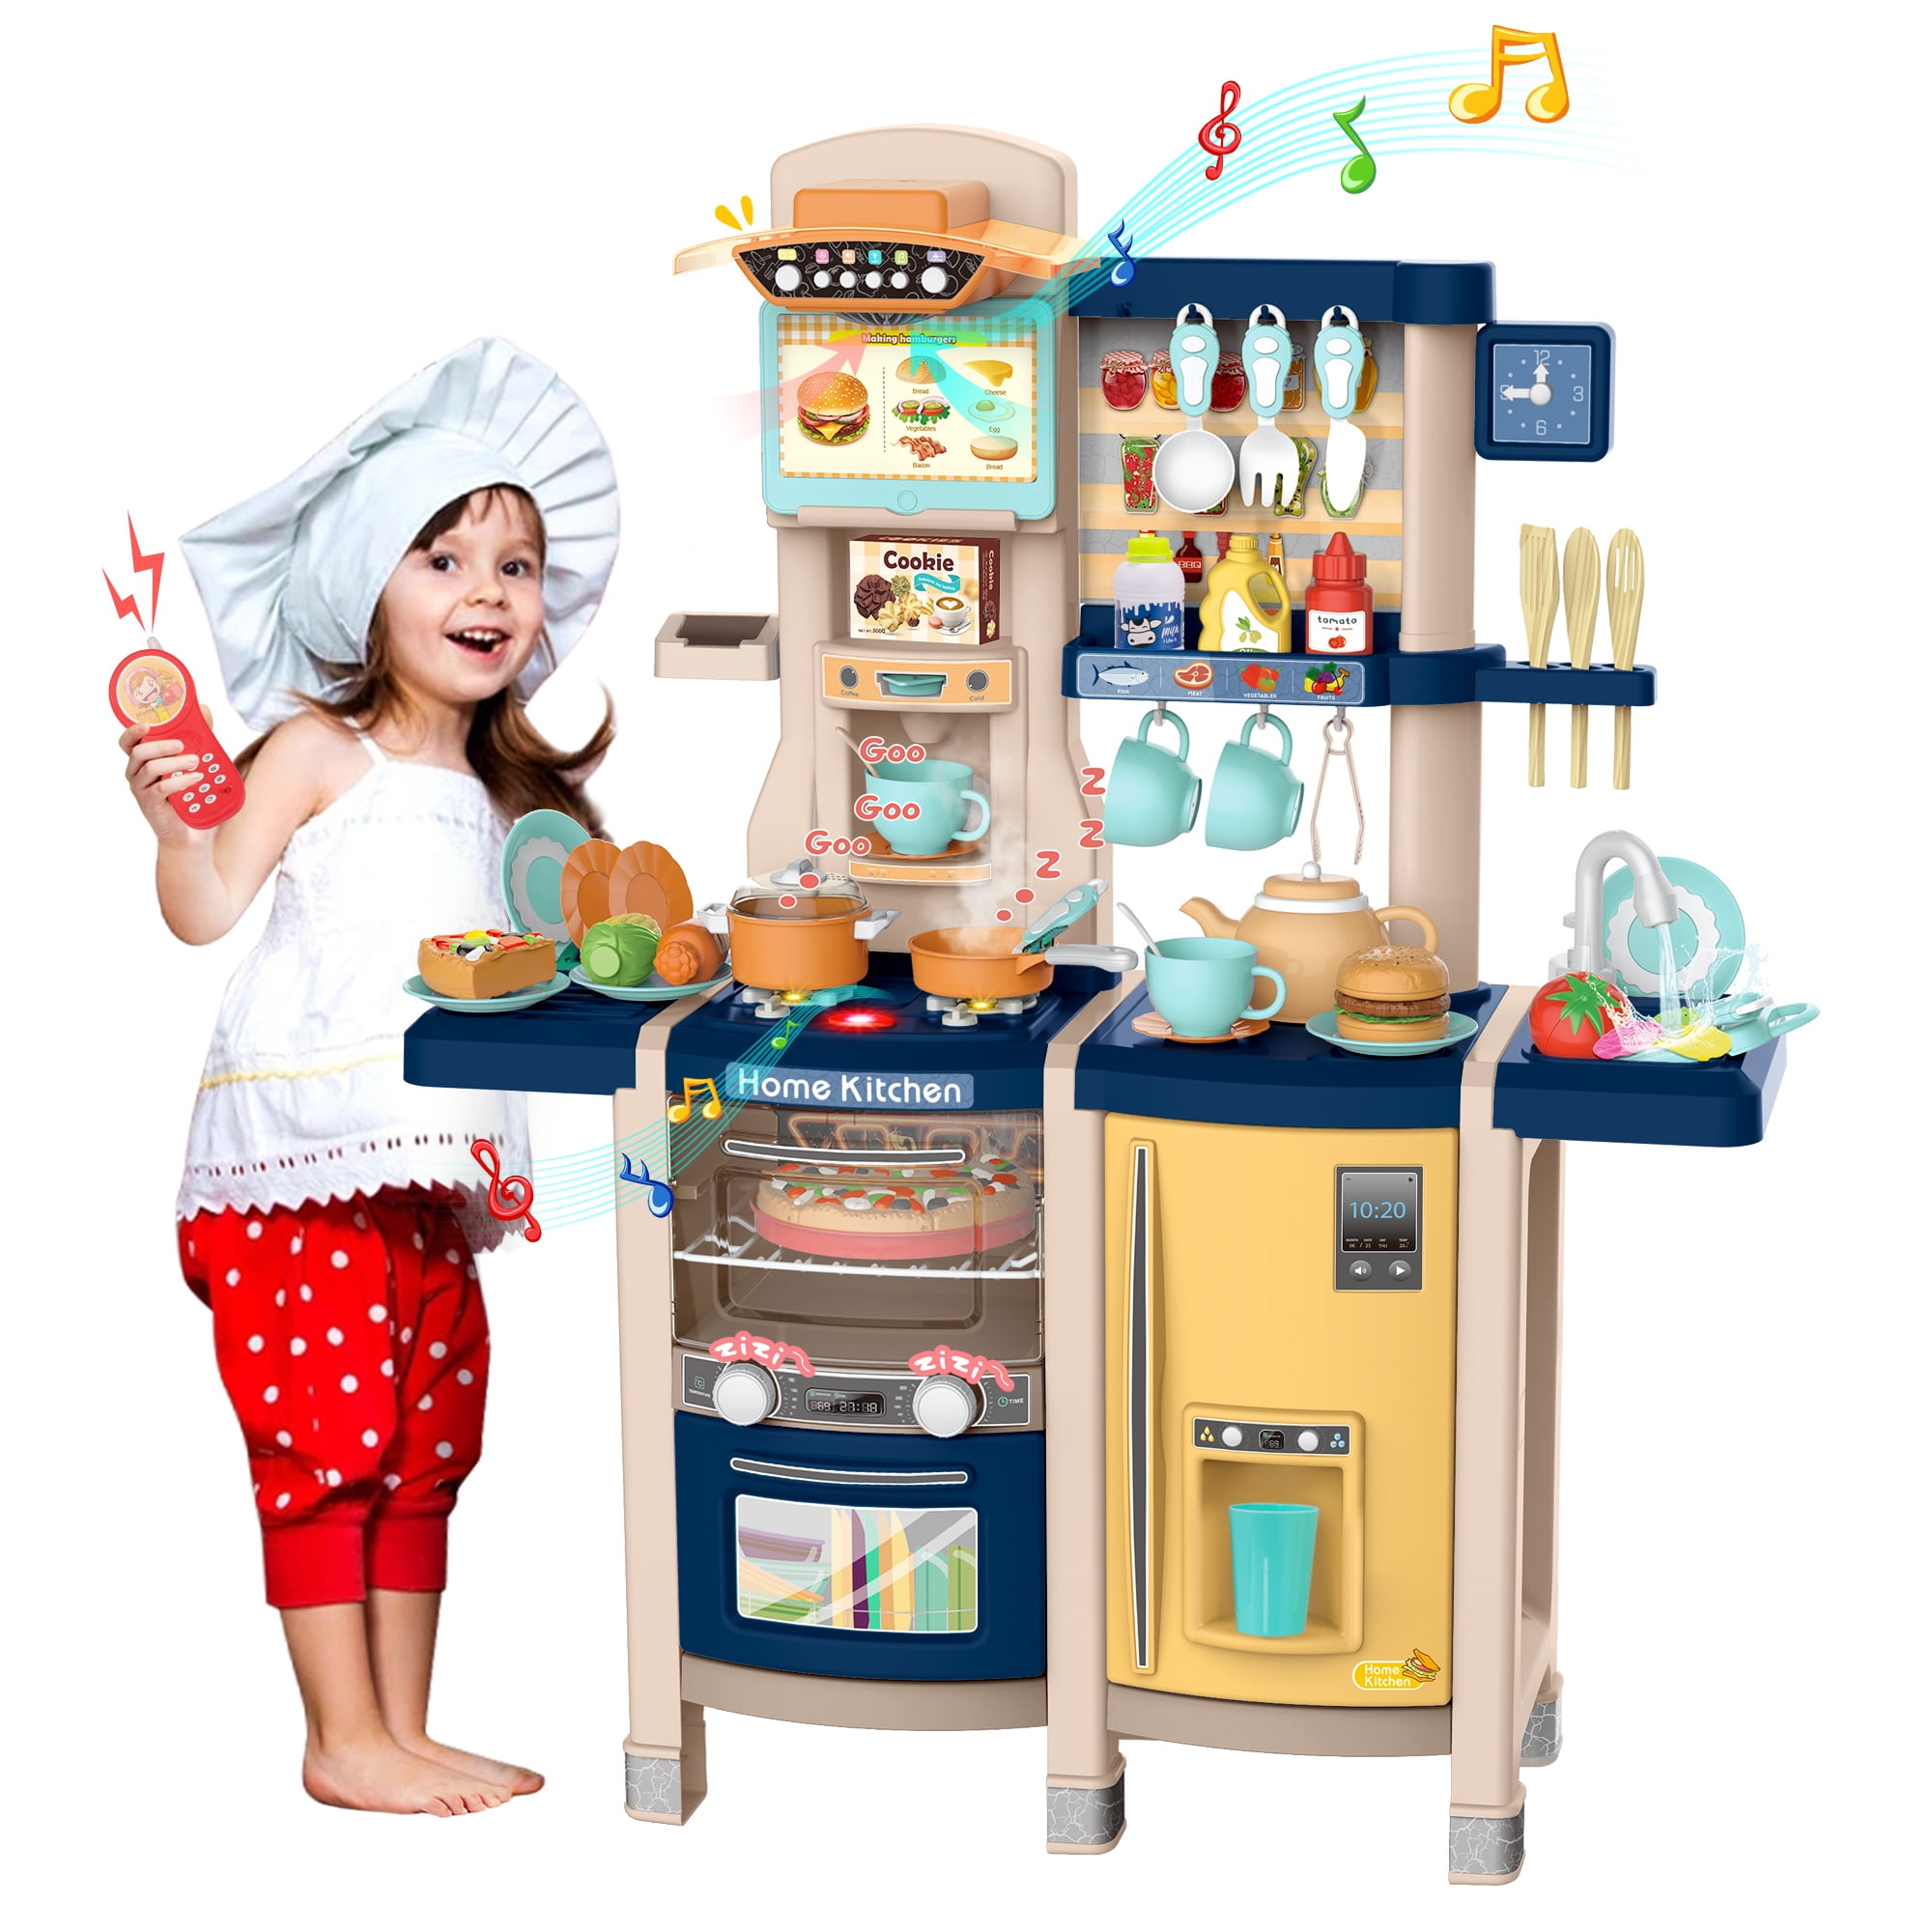 Play At Home Cooker Oven Toy Girls Children For Own Your Little One Xmas Gift 